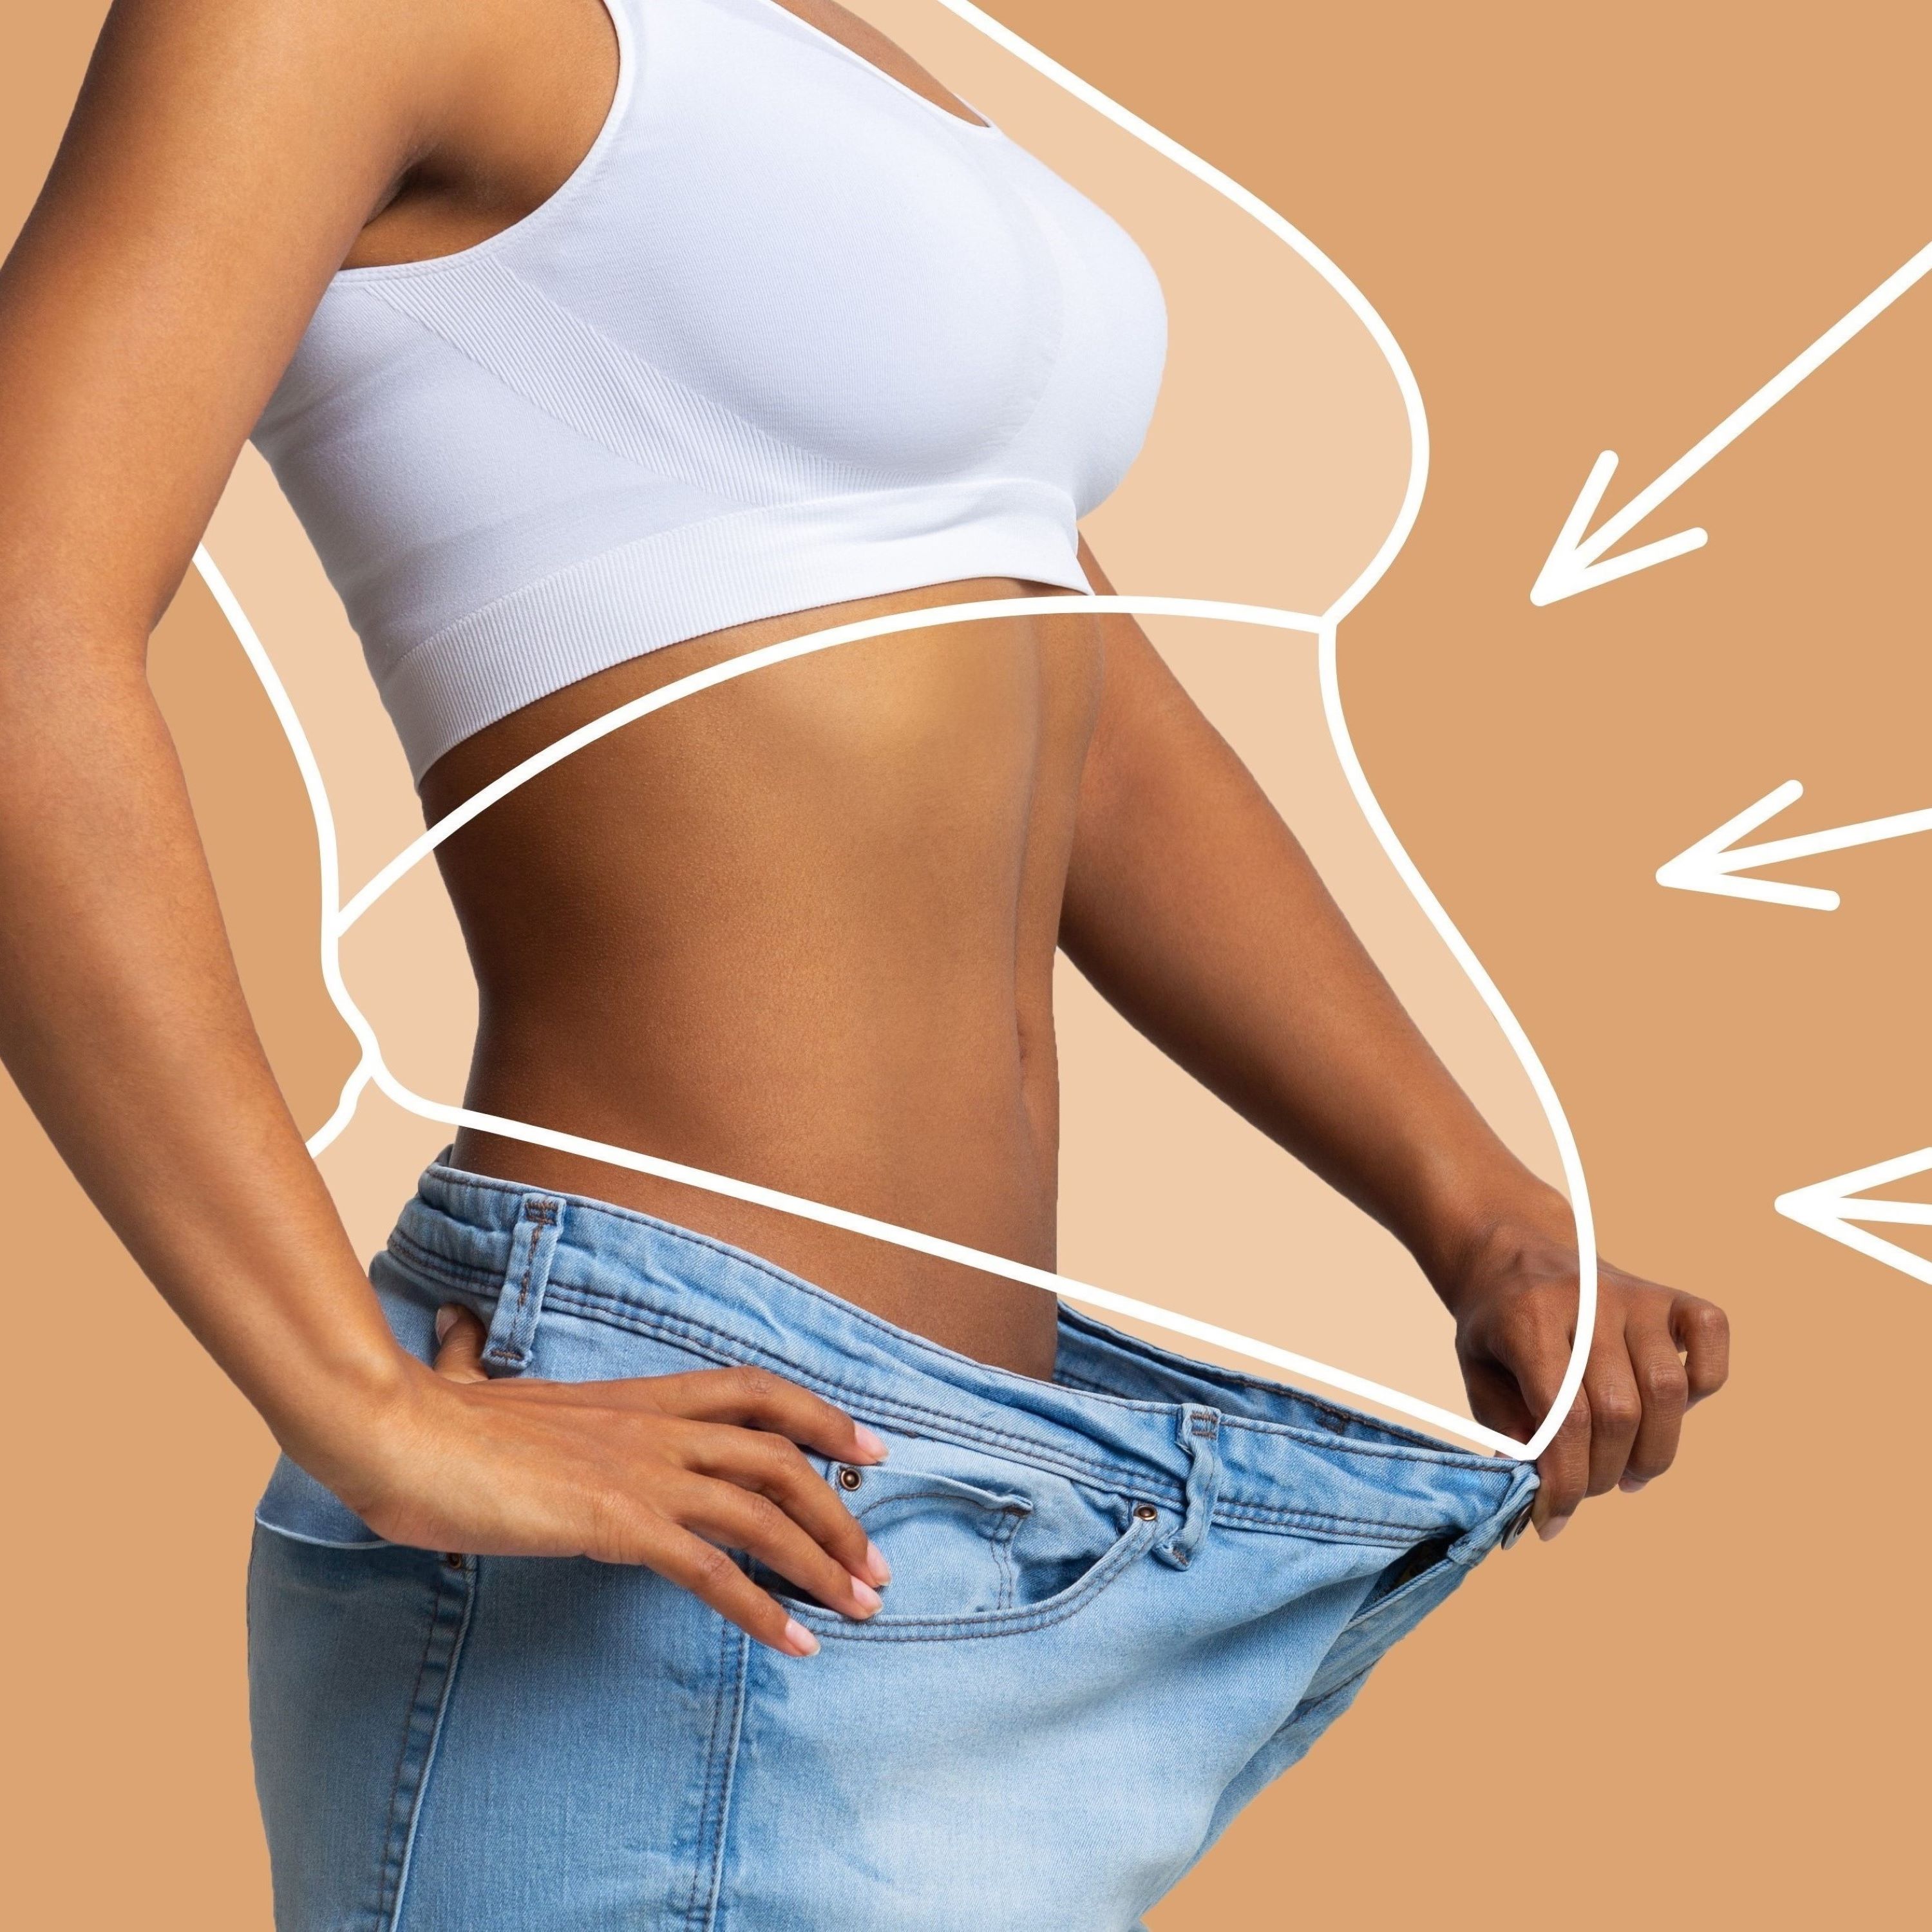 Does Liposuction Cause Loose Skin? Thumbnail